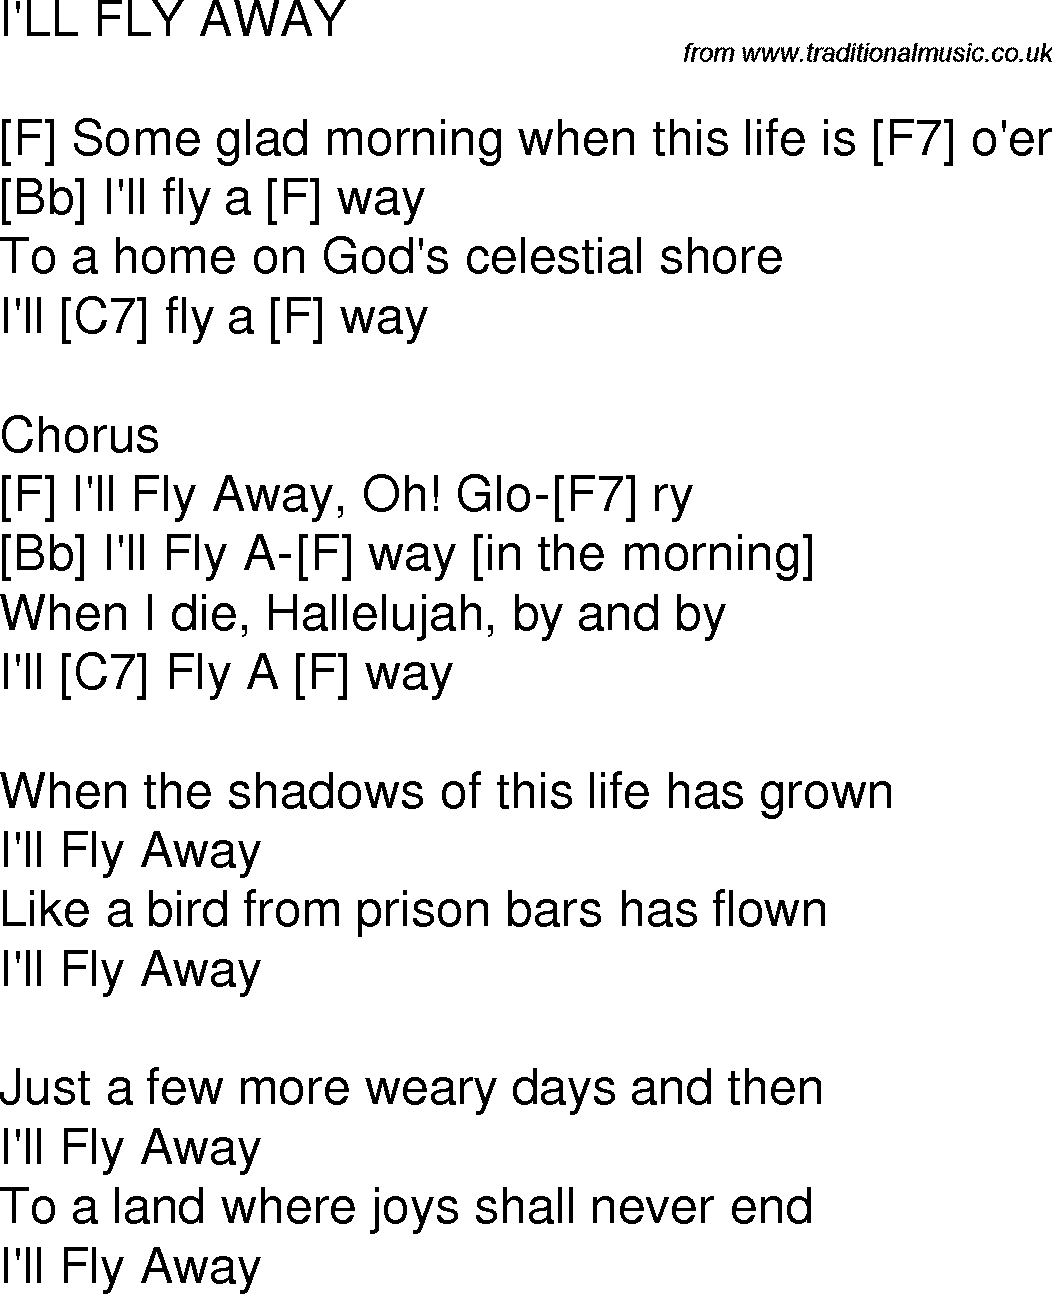 I Ll Fly Away Chords Old Time Song Lyrics With Guitar Chords For Ill Fly Away C